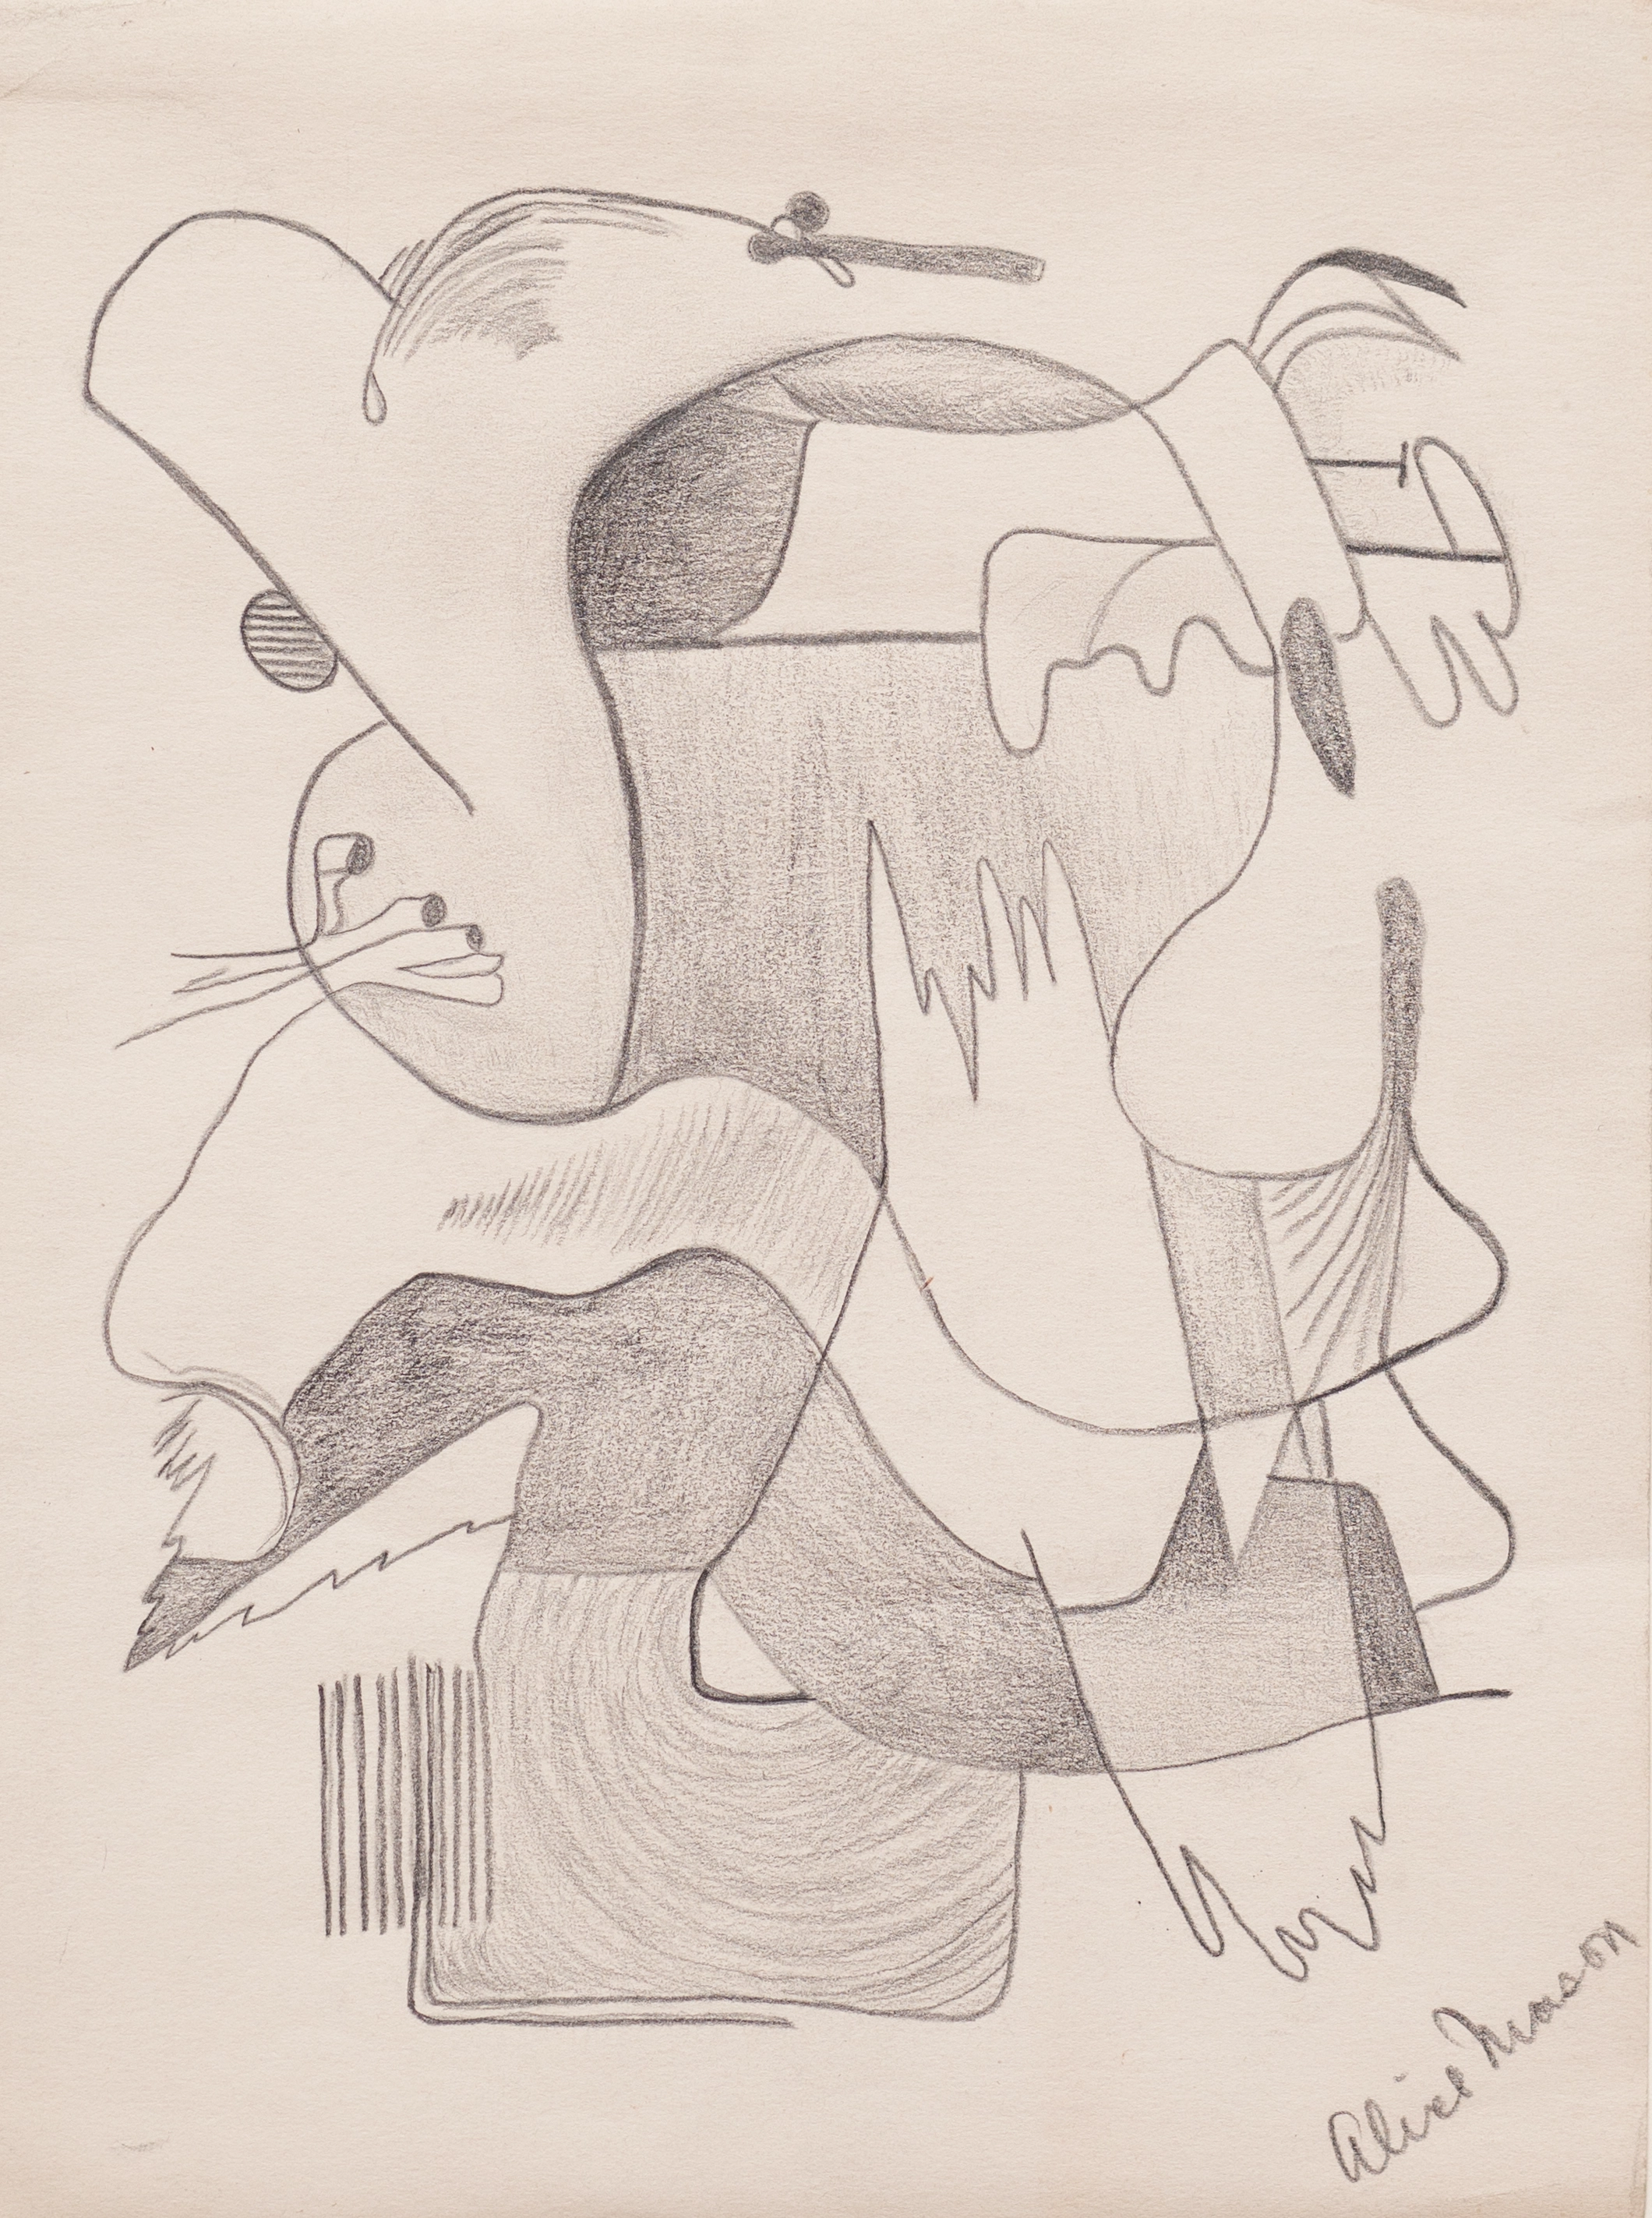 Abstract drawing with graphite on paper, comprised of layered lines and biomorphic forms centered on the page. "Alice Mason" is signed on the bottom right.